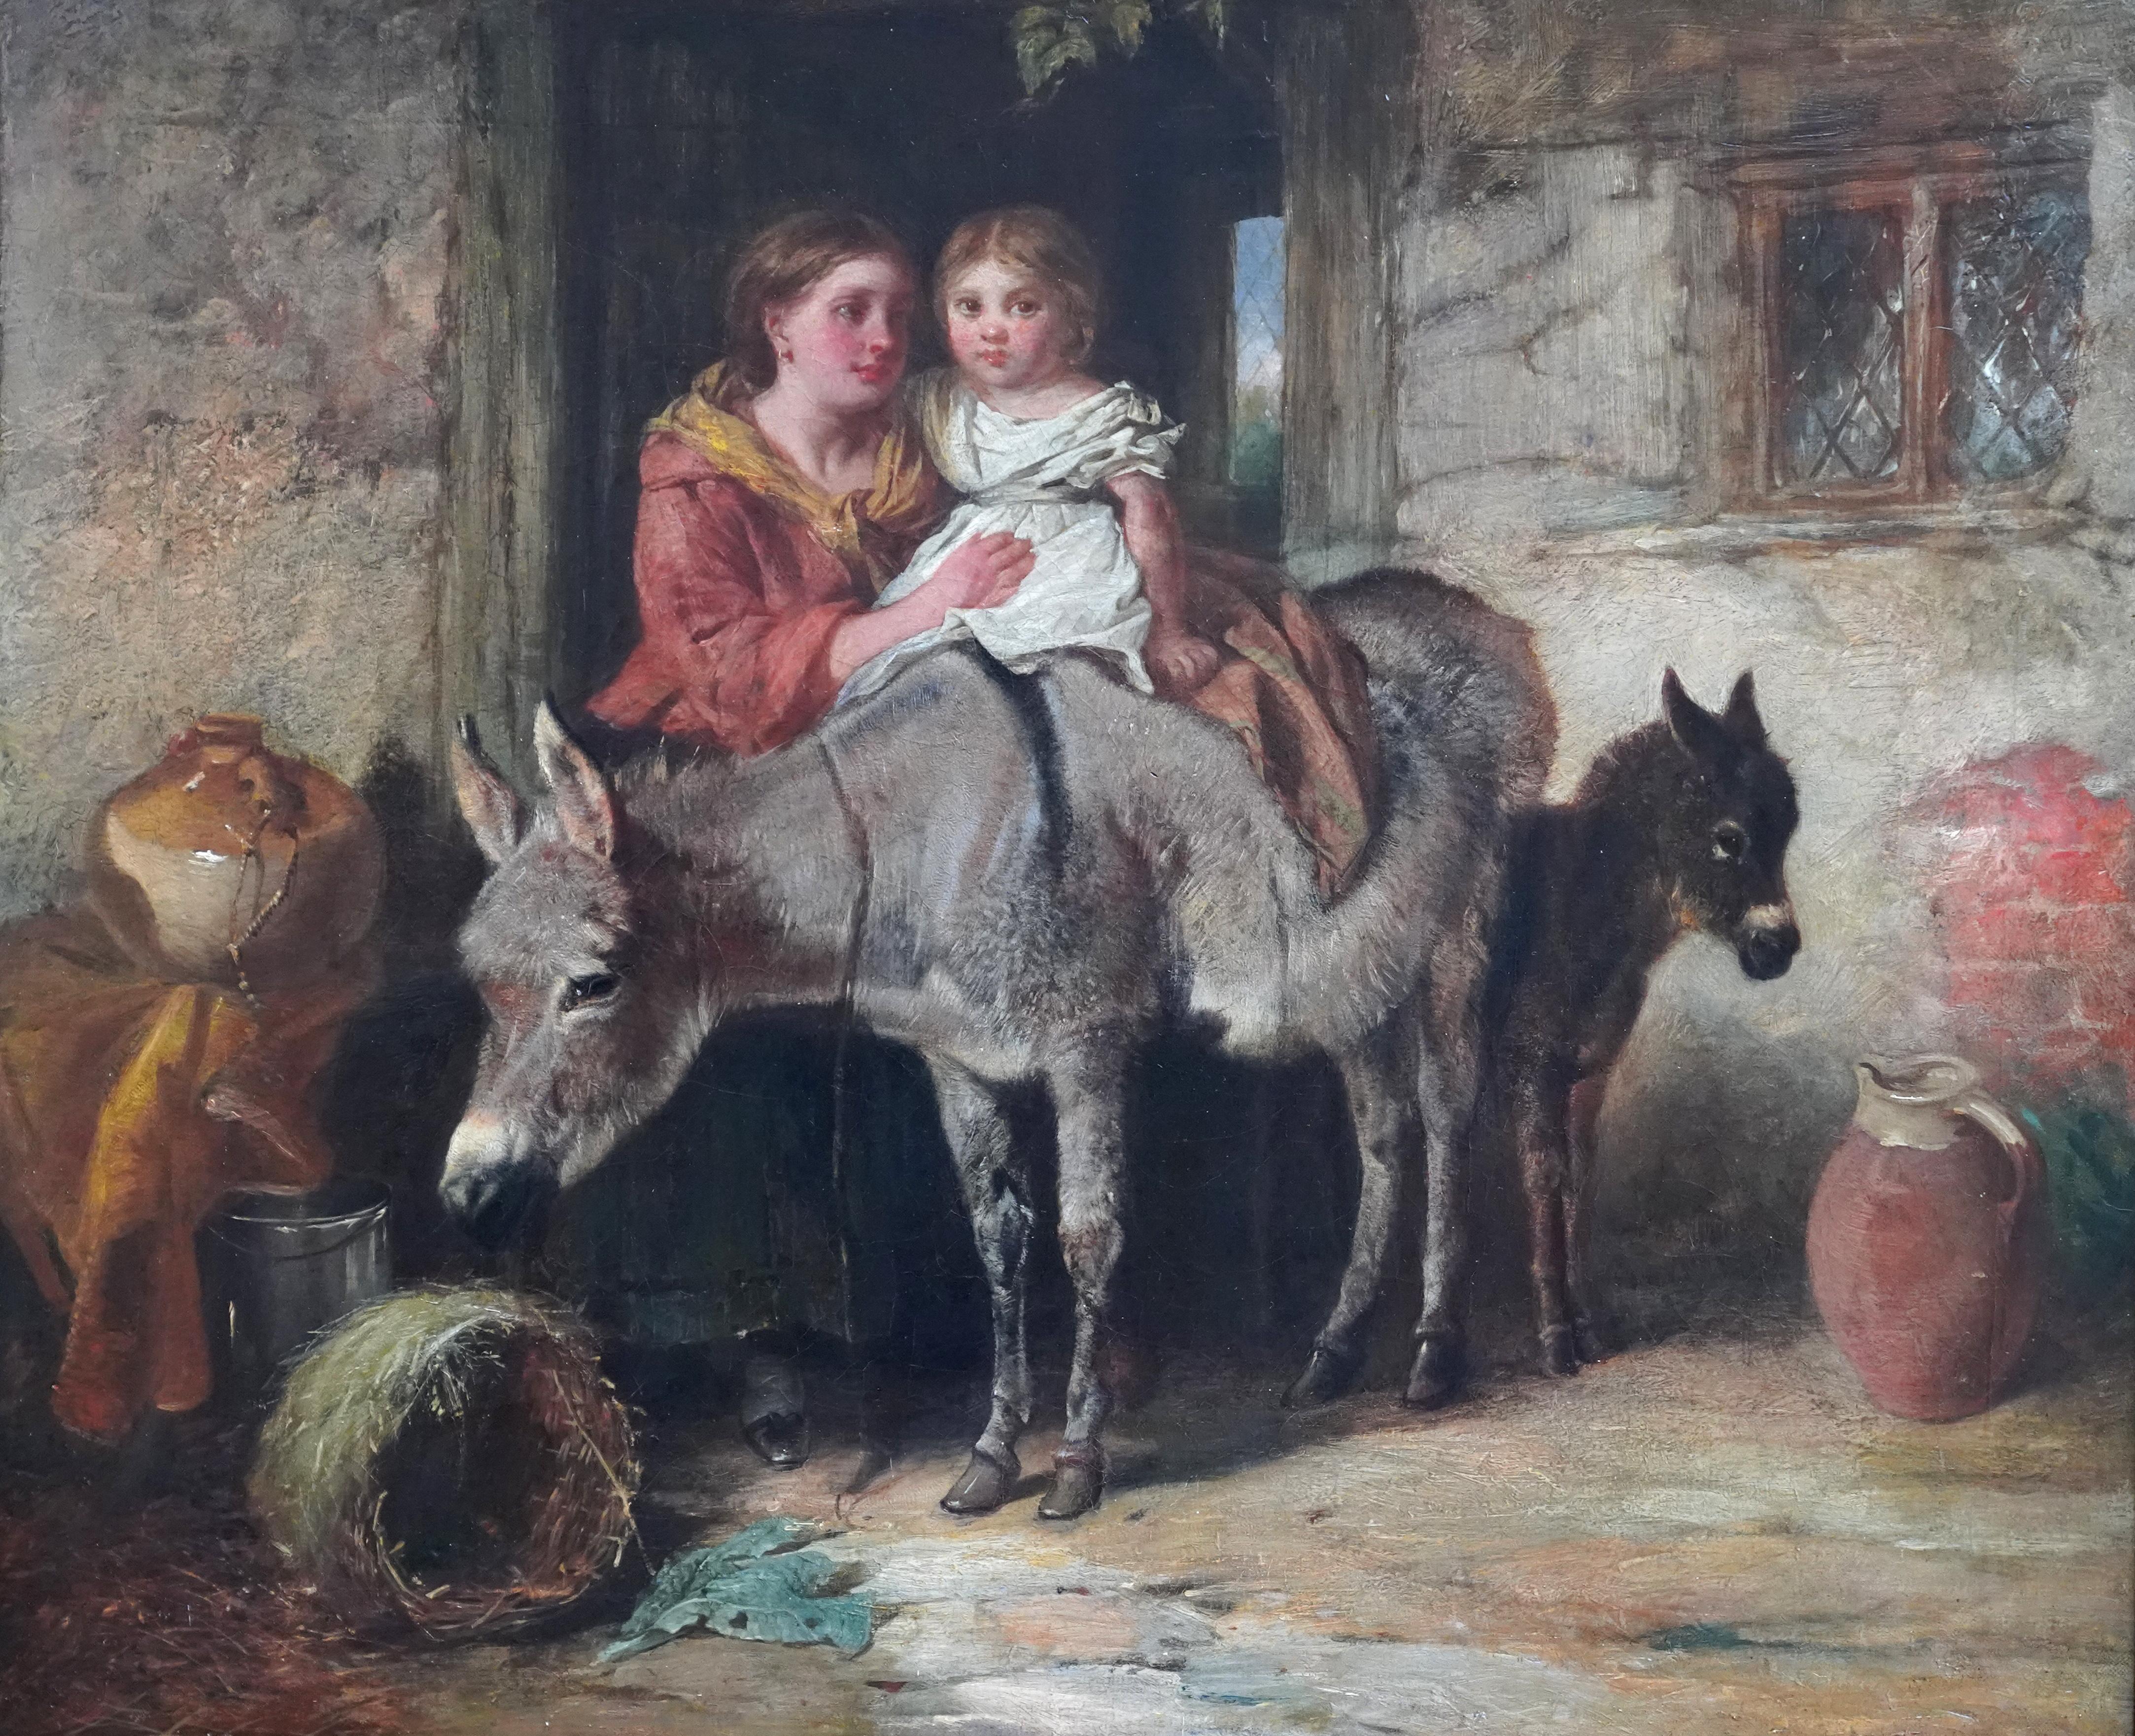 Portrait of Mother, Child and Donkey - British 19th century genre oil painting 6